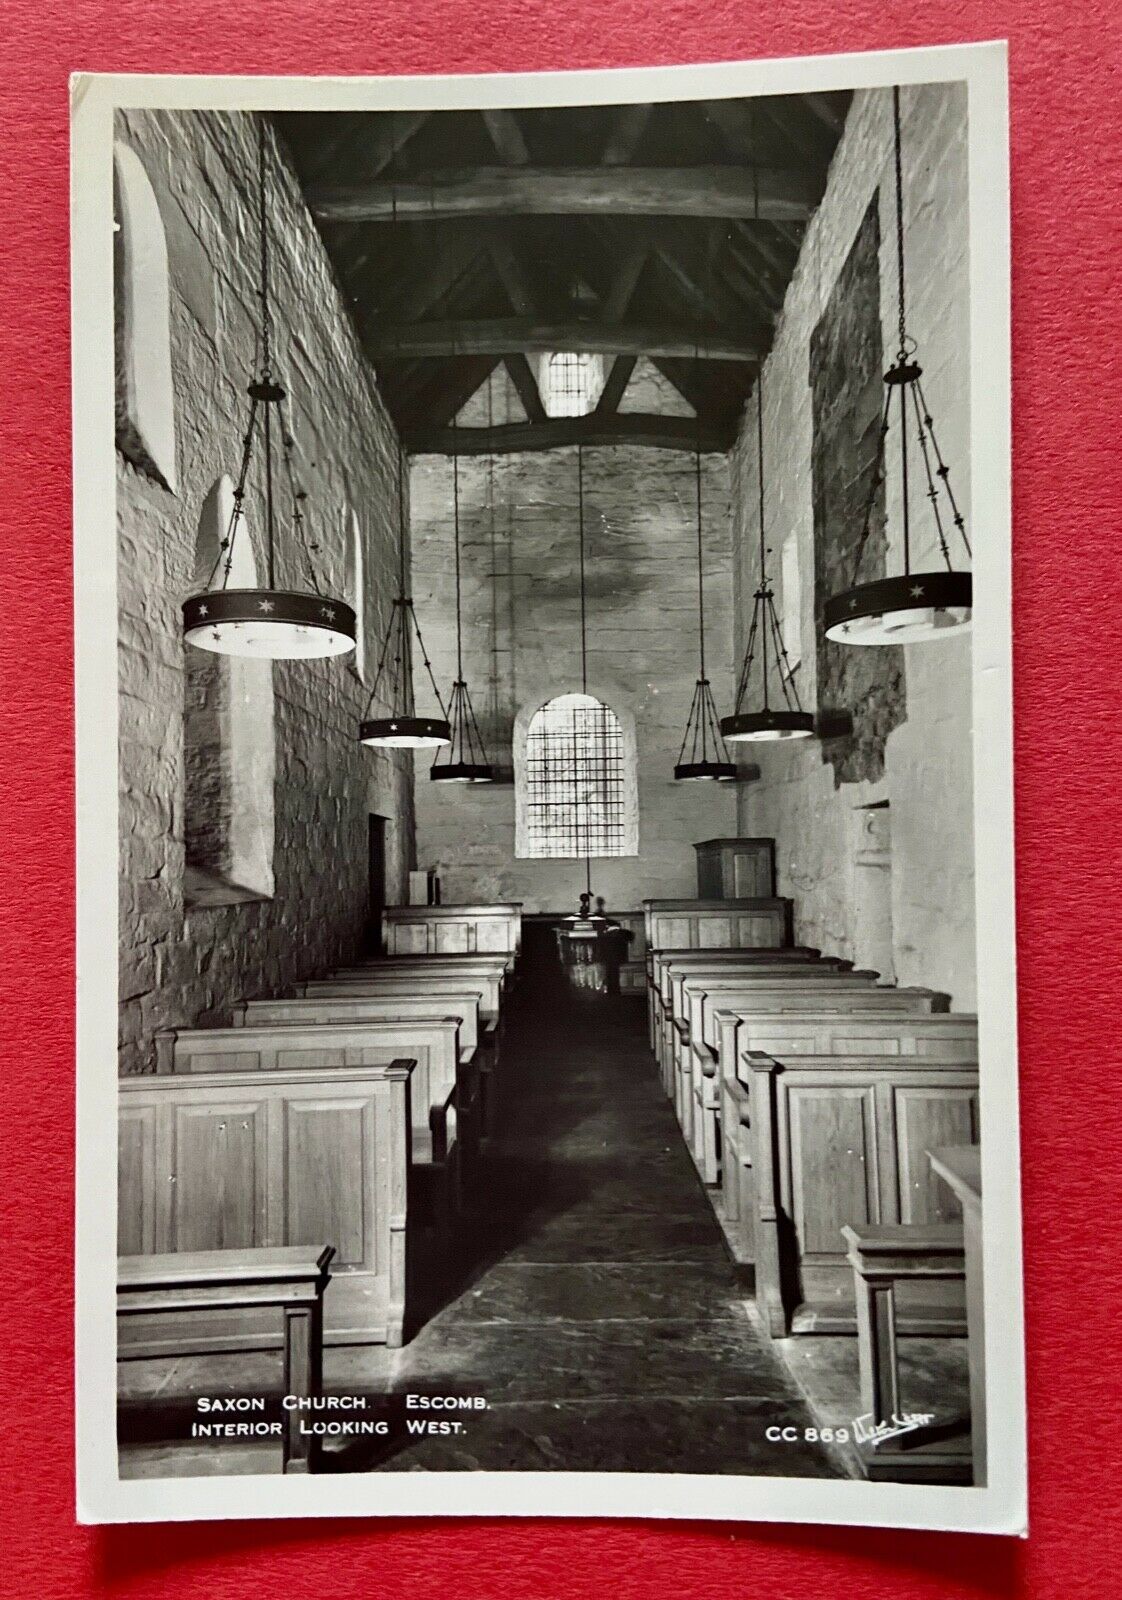 House Clearance - Escomb Saxon Church - Interior looking West - 1940s/50s - unposted